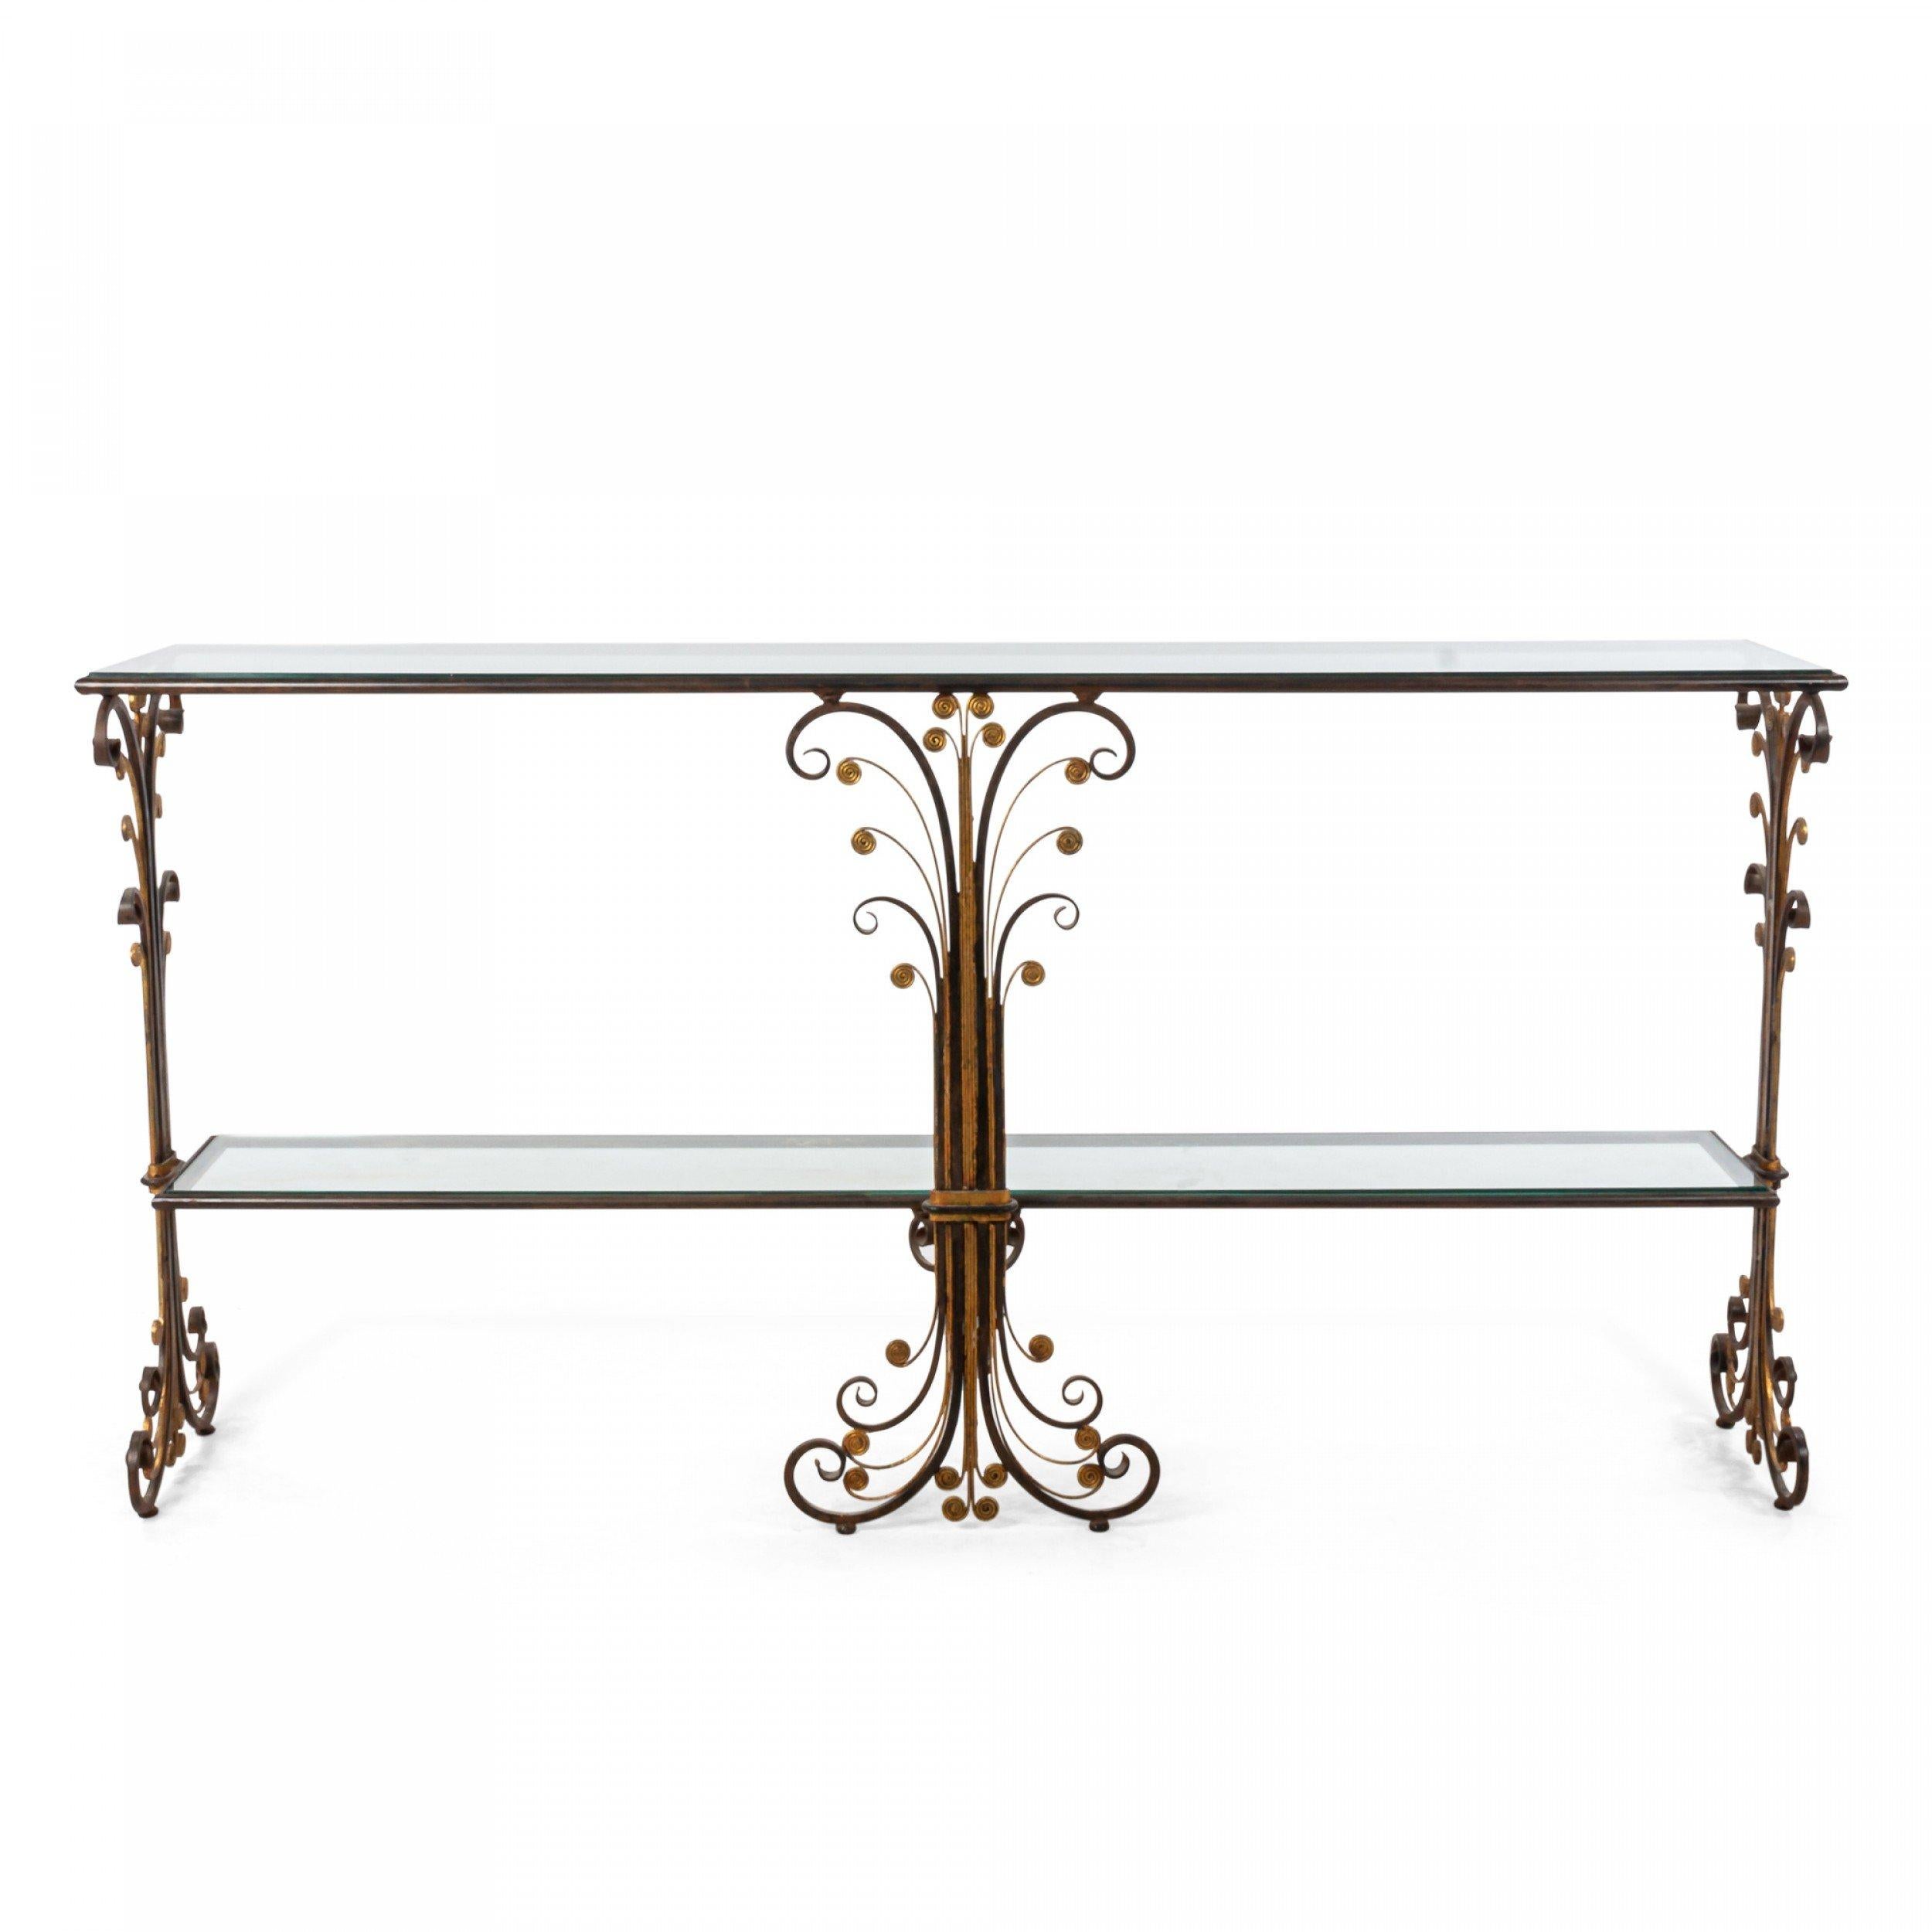 French Art Deco style two-tier iron console (Davenport) table with gilt trim and scroll design sides and center support with an inset glass top and shelf.